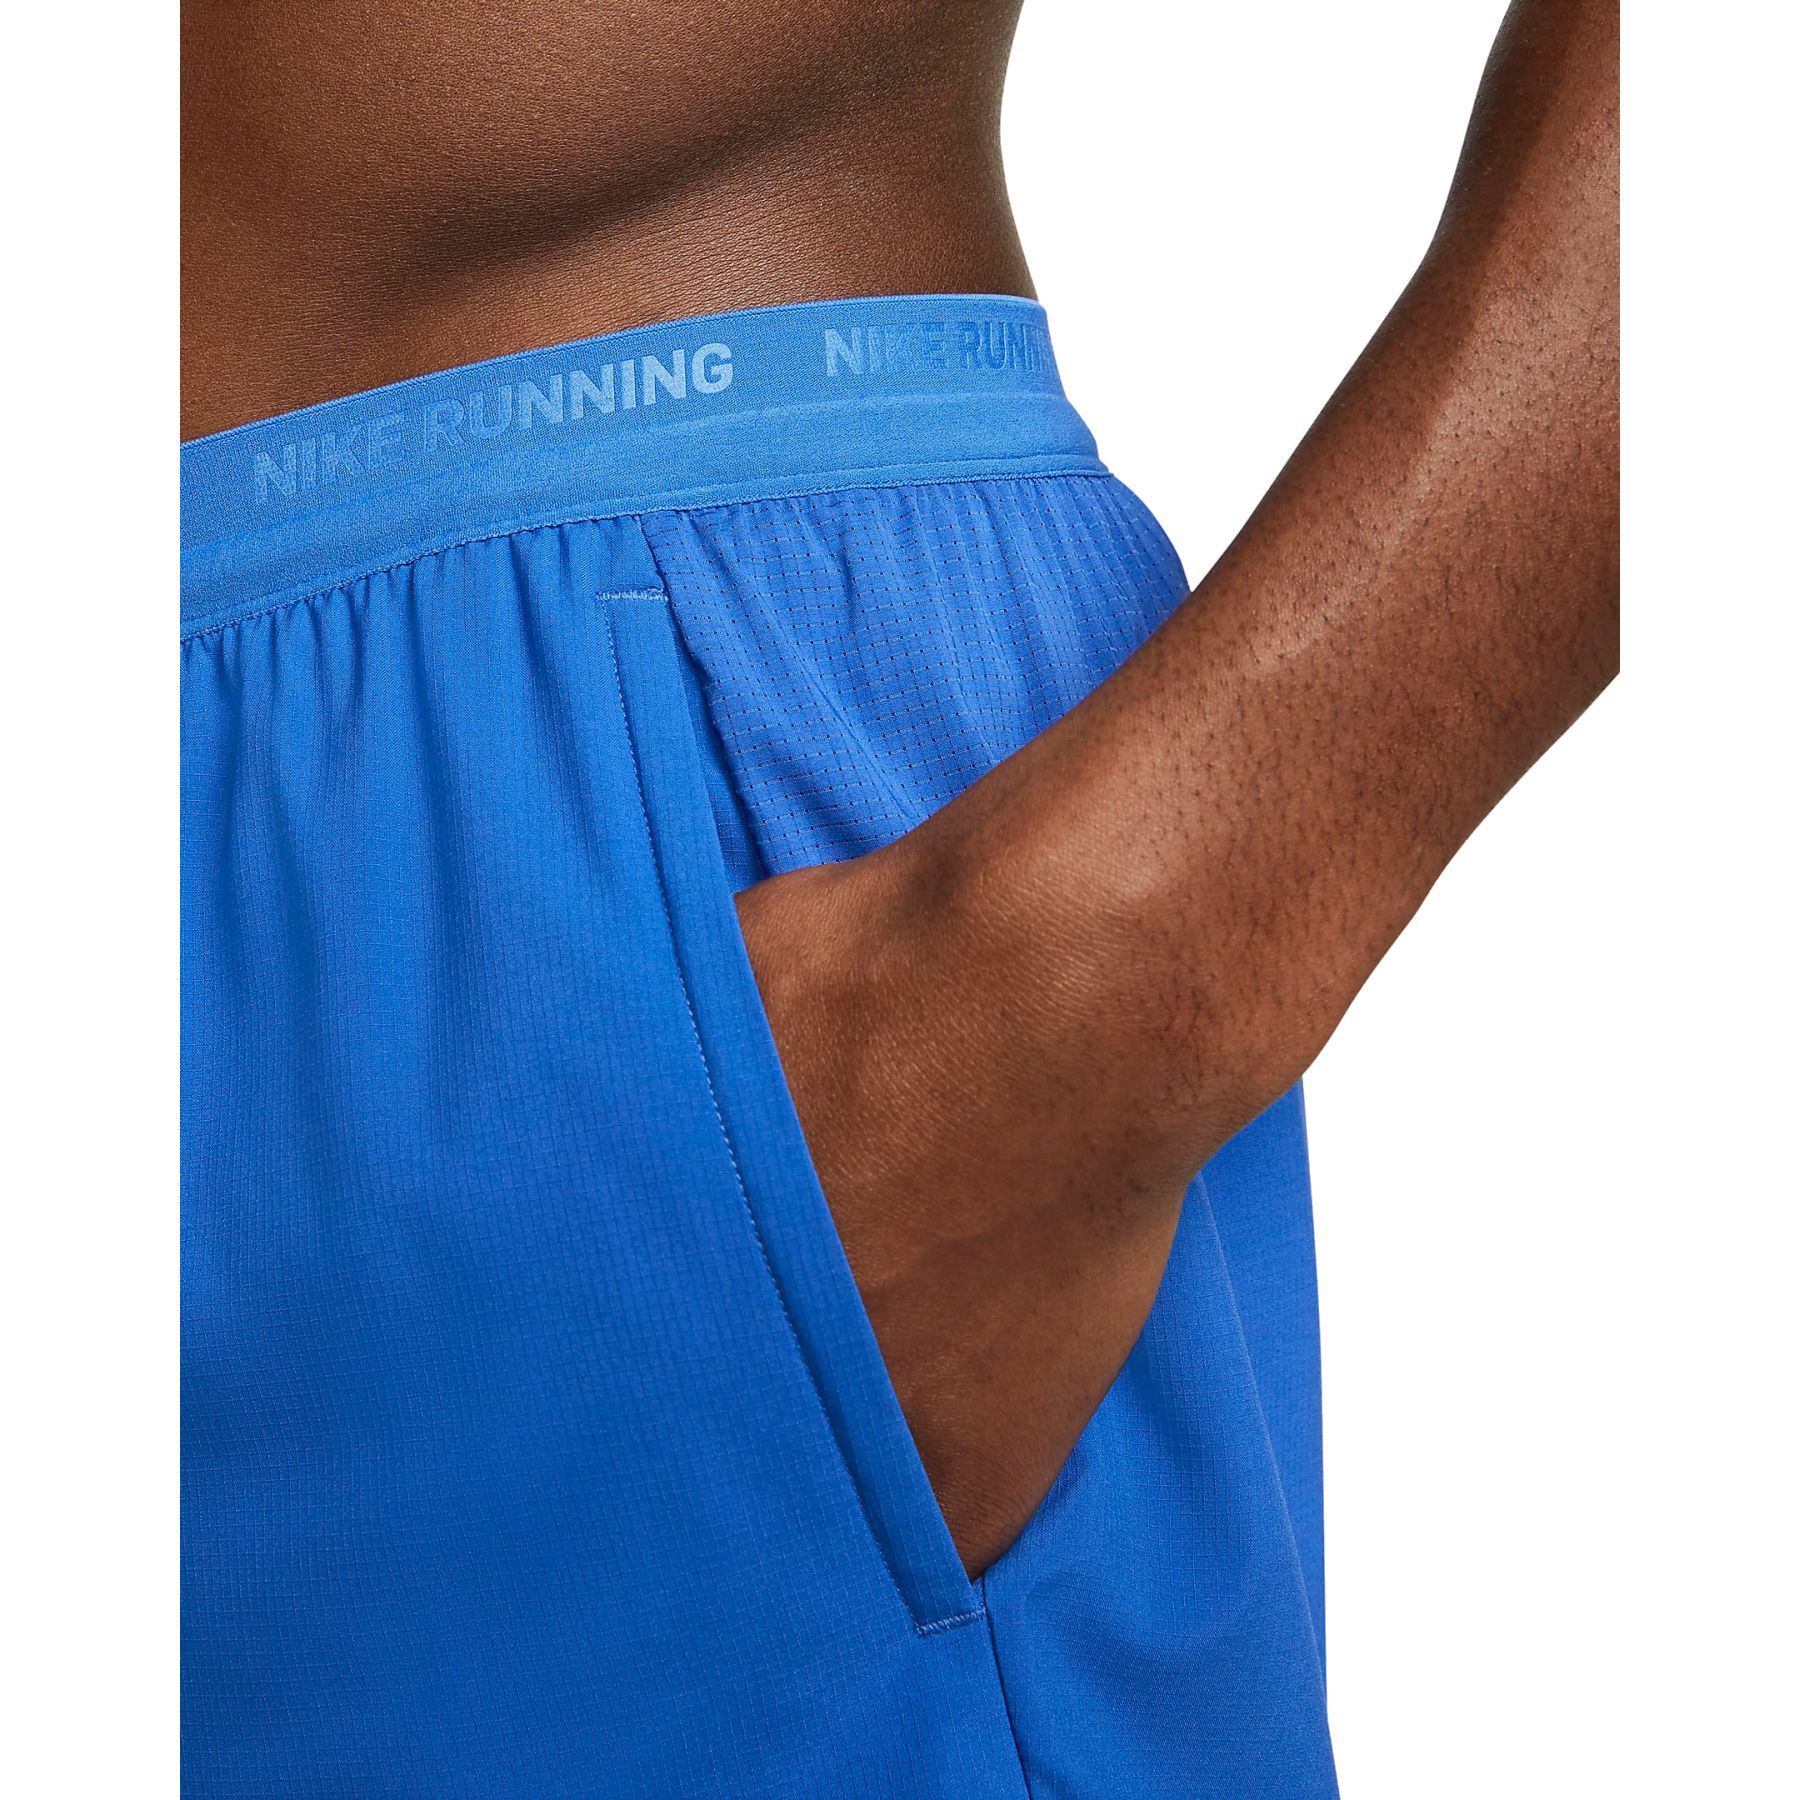 Nike Dri-FIT Stride 5 Brief-Lined Running Shorts Men - game royal